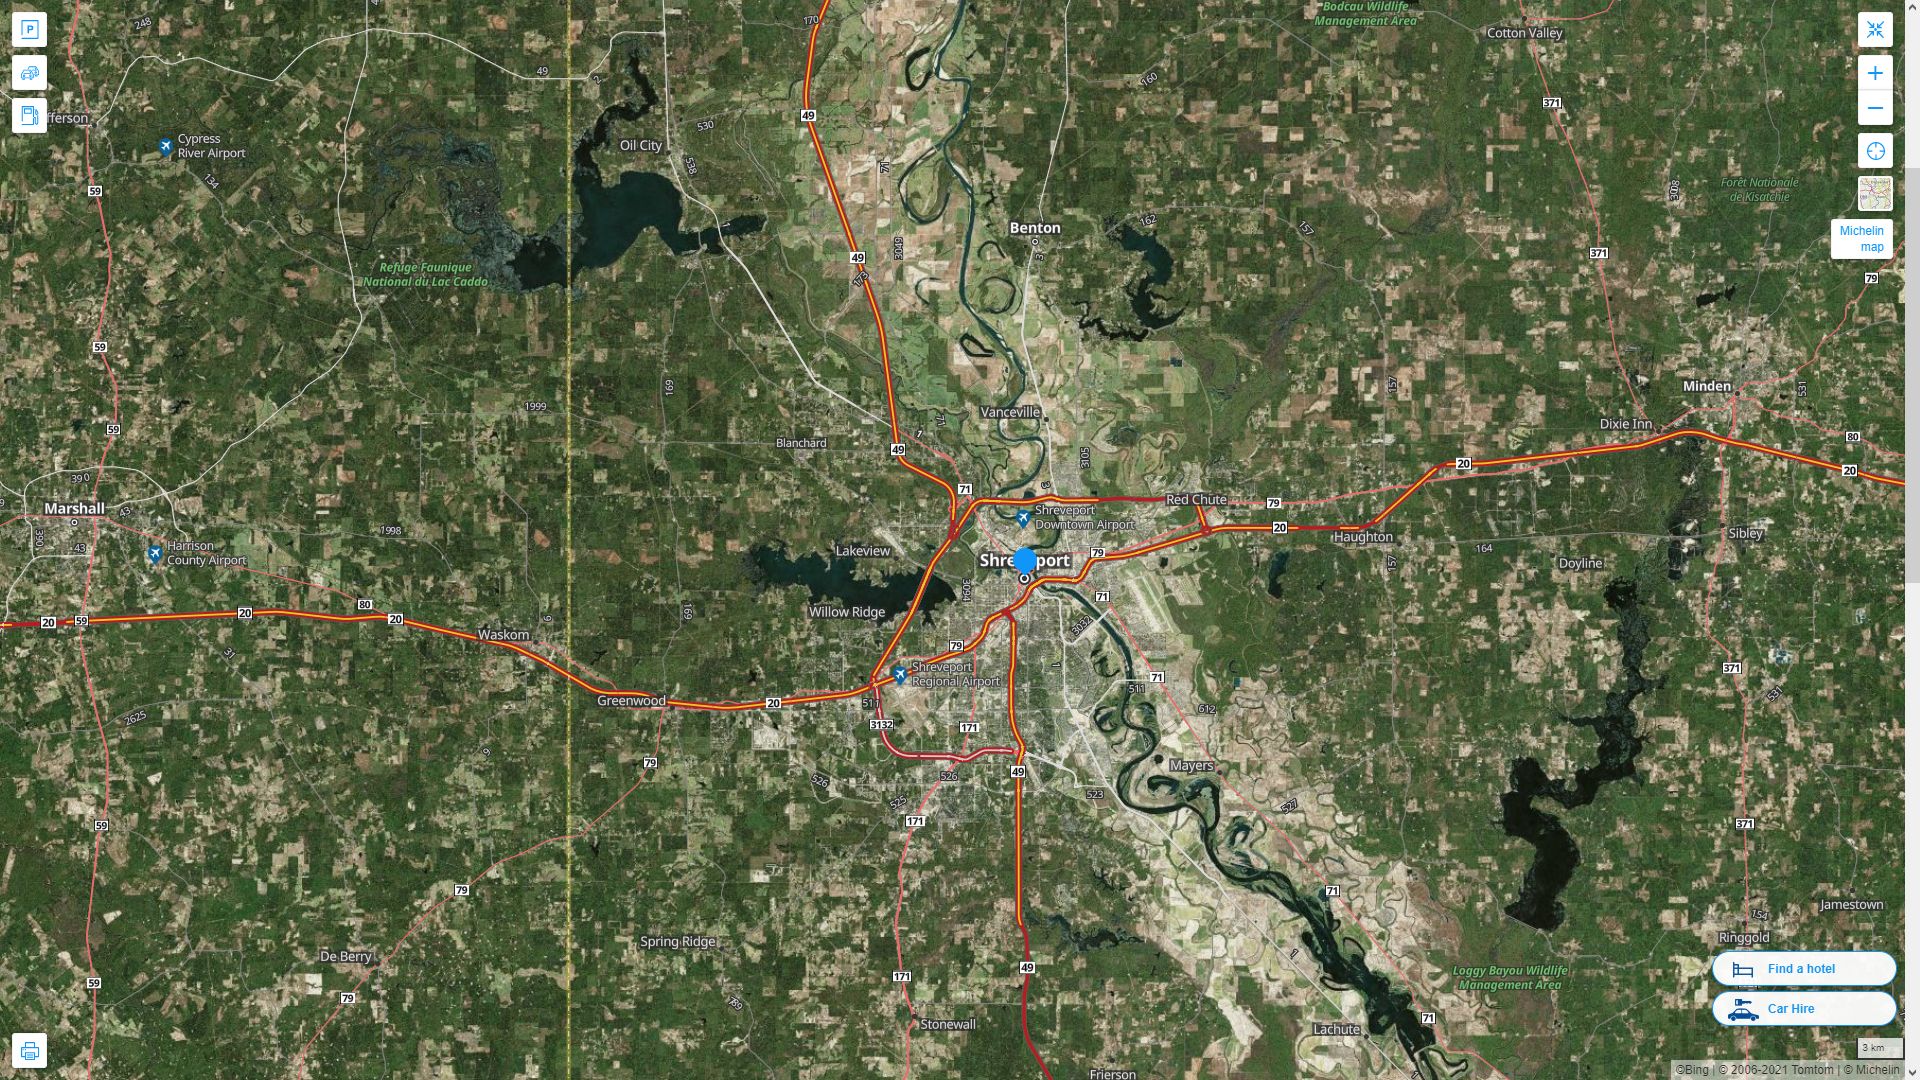 Shreveport Louisiana Highway and Road Map with Satellite View